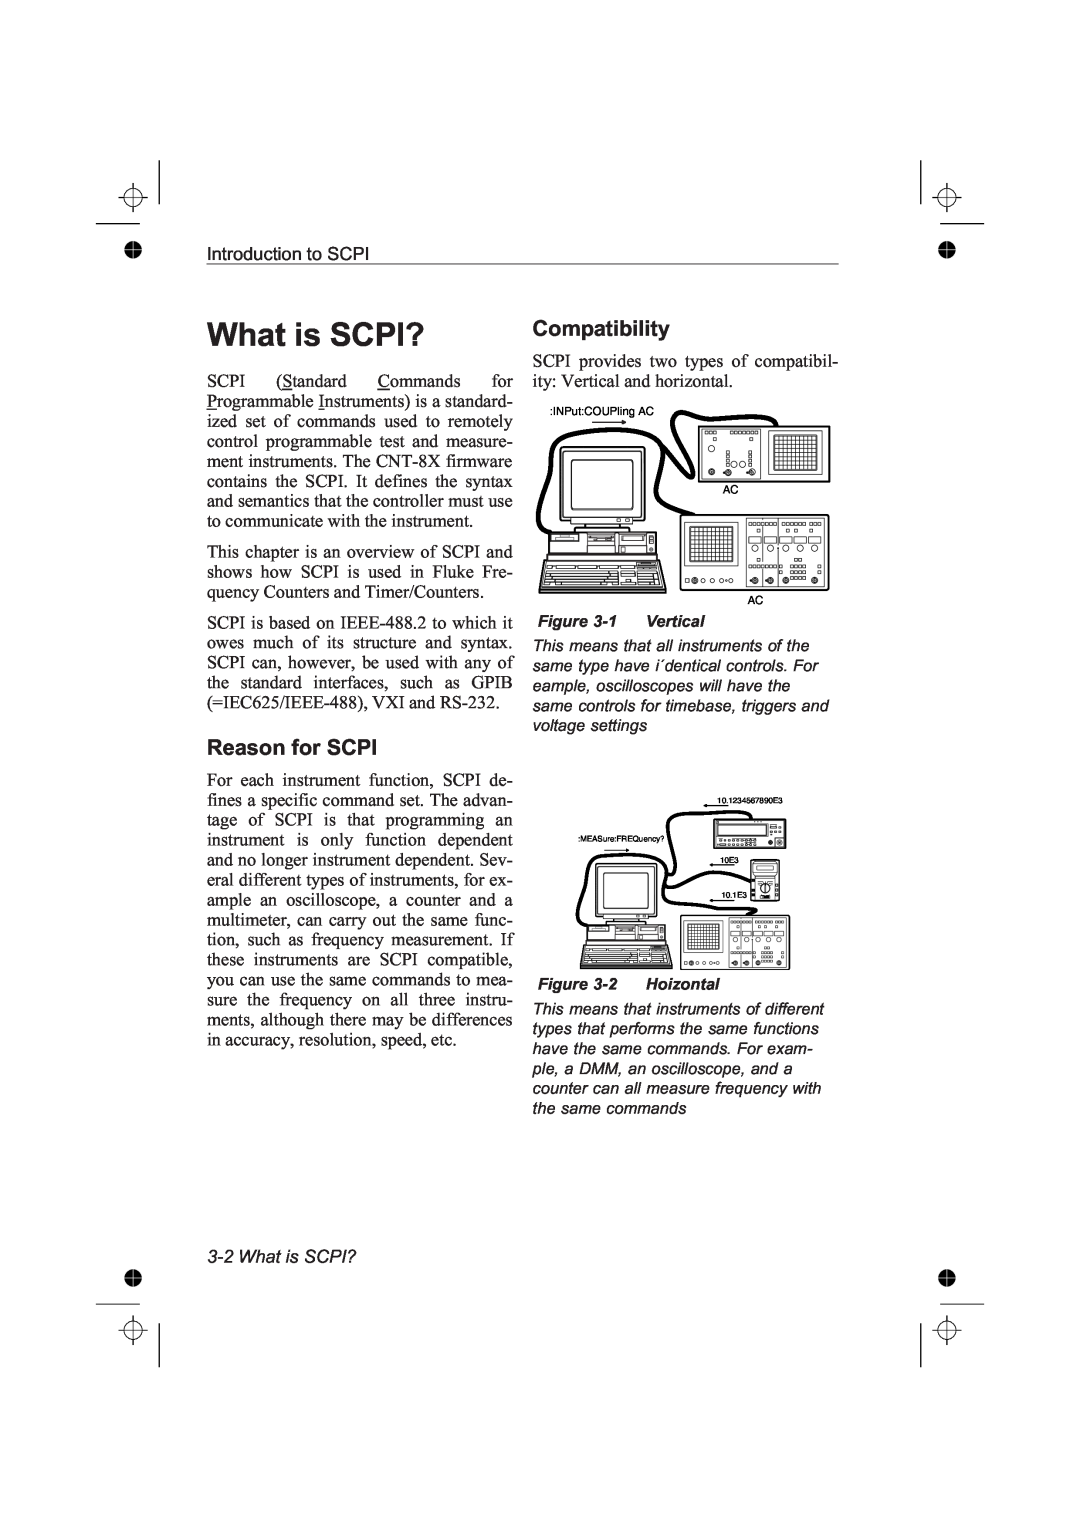 Fluke PM6685R, PM6681R manual What is SCPI?, Reason for SCPI, Compatibility 